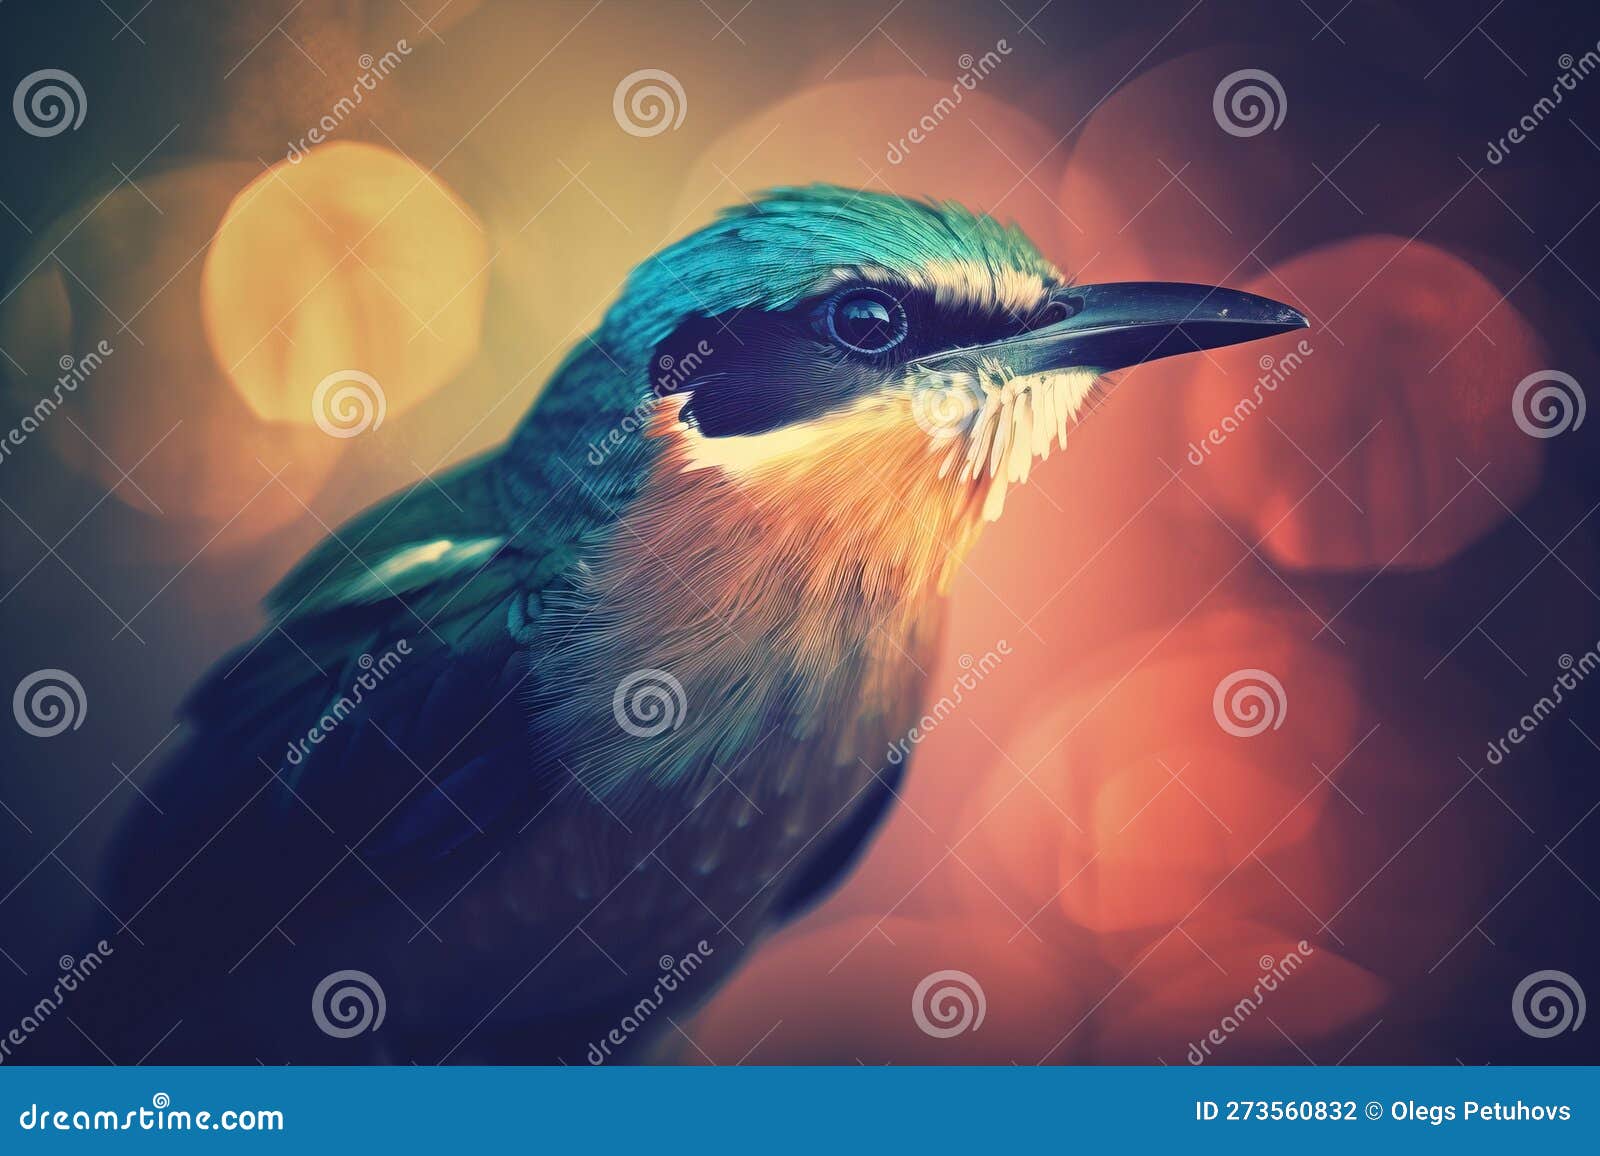 a colorful bird with a blurry background and boke of lights in the backgrouds of the image is a blurry image of a bird